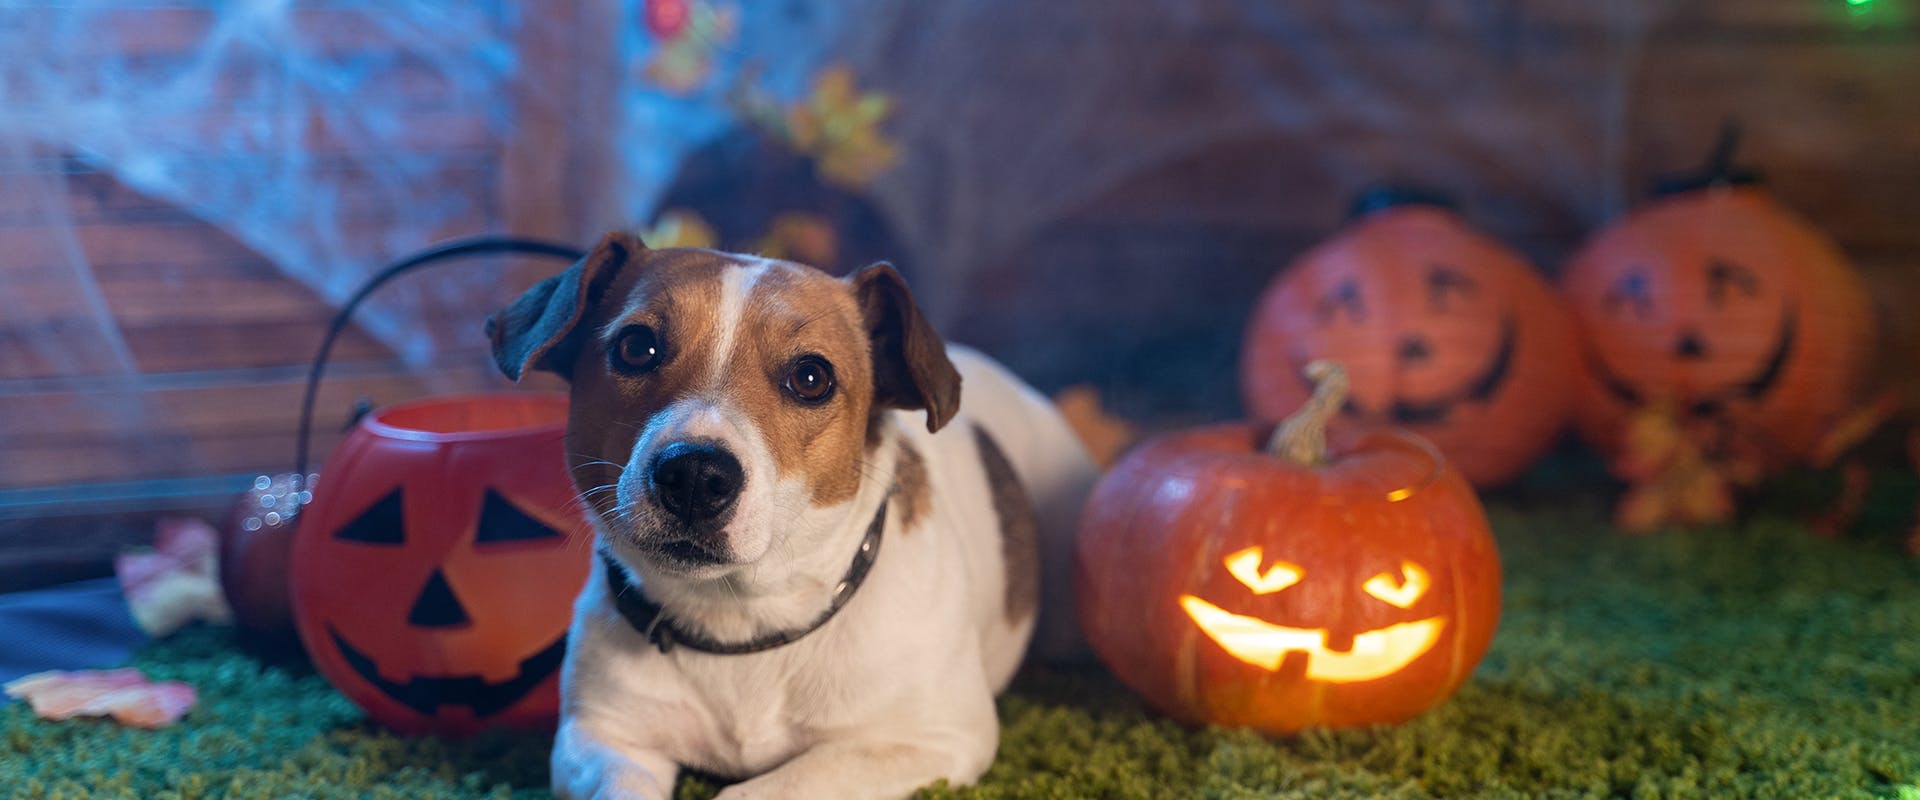 A dog surrounded by pumpkins and Halloween decorations